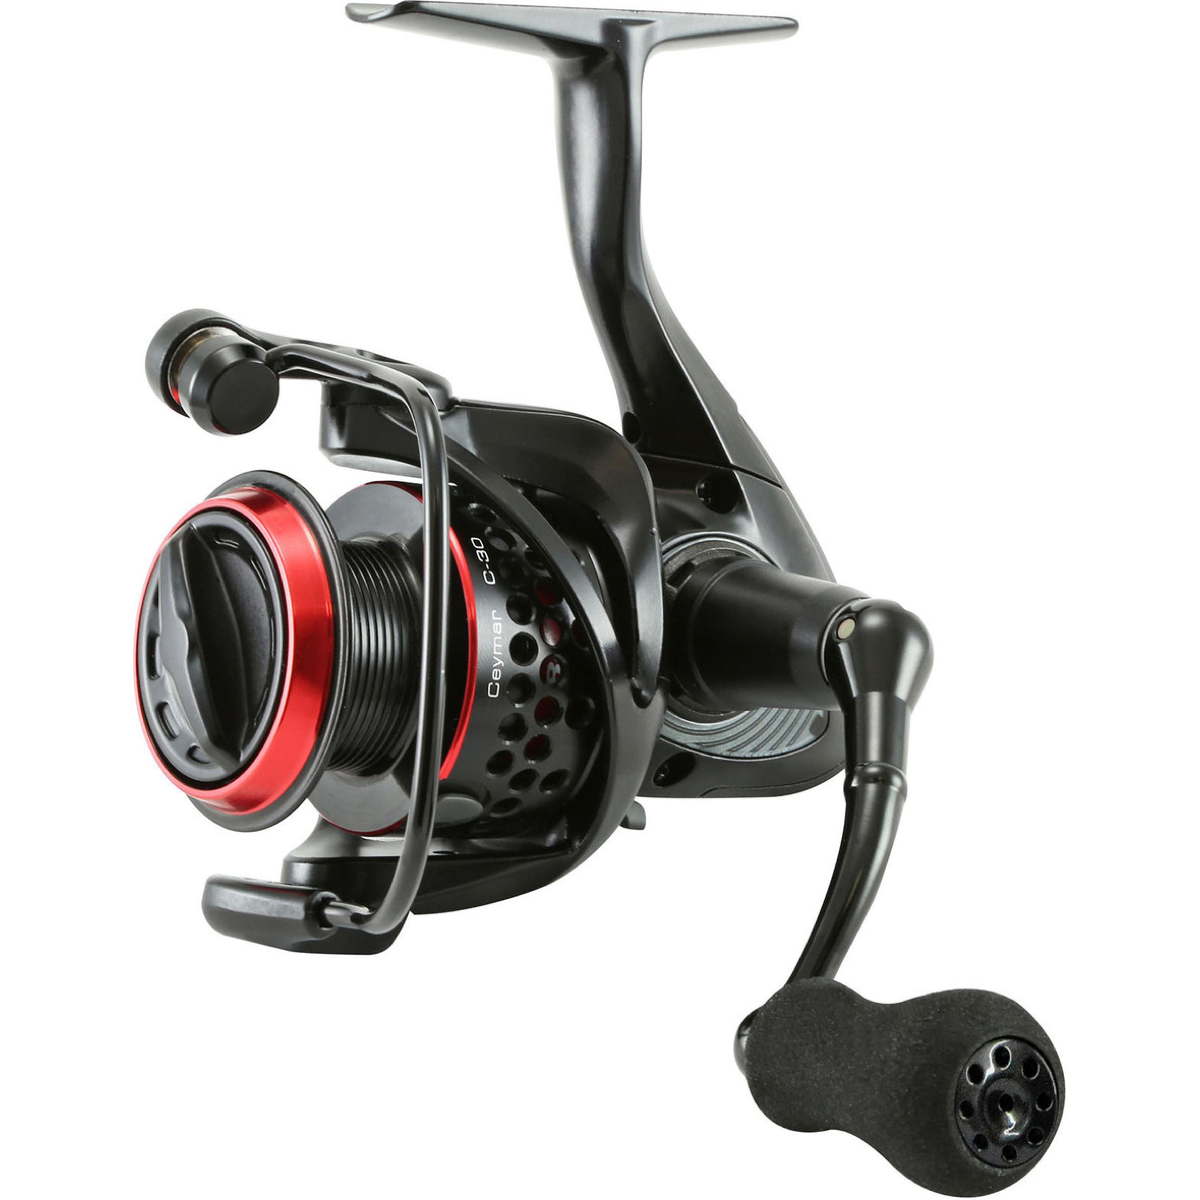 Photo of Okuma Ceymar Spinning Reel for sale at United Tackle Shops.